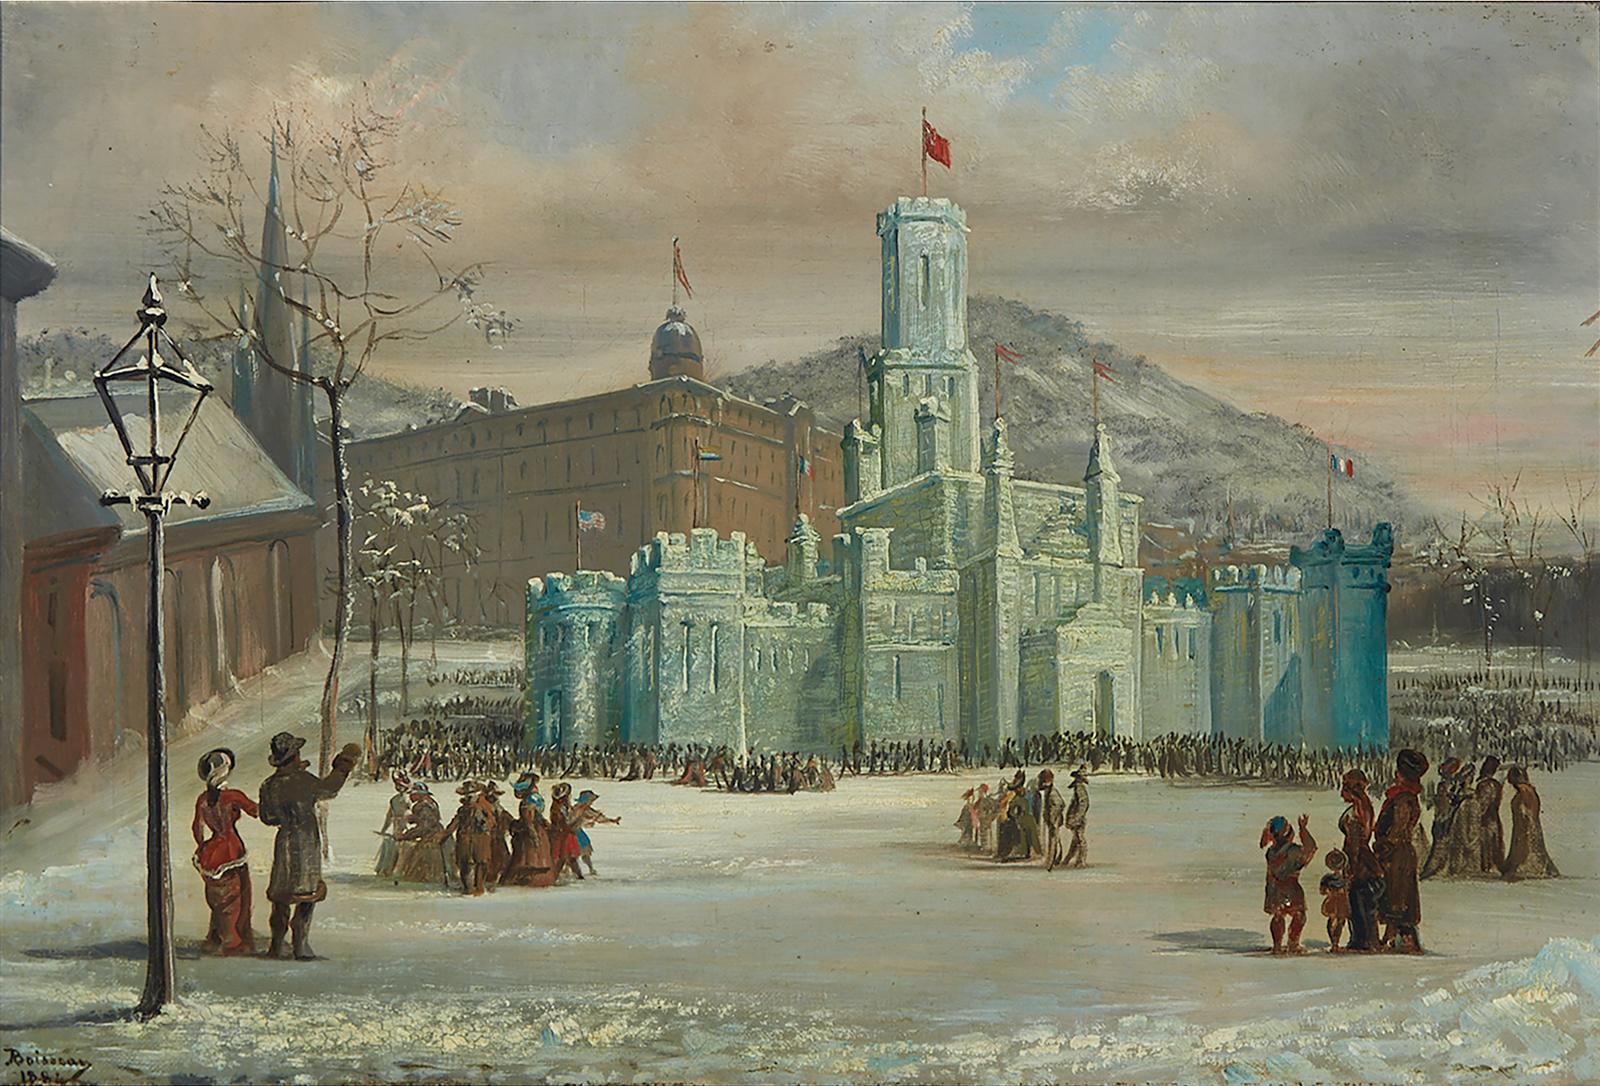 Alfred W. Boisseau (1823-1901) - Ice Palace, Montreal, 1884